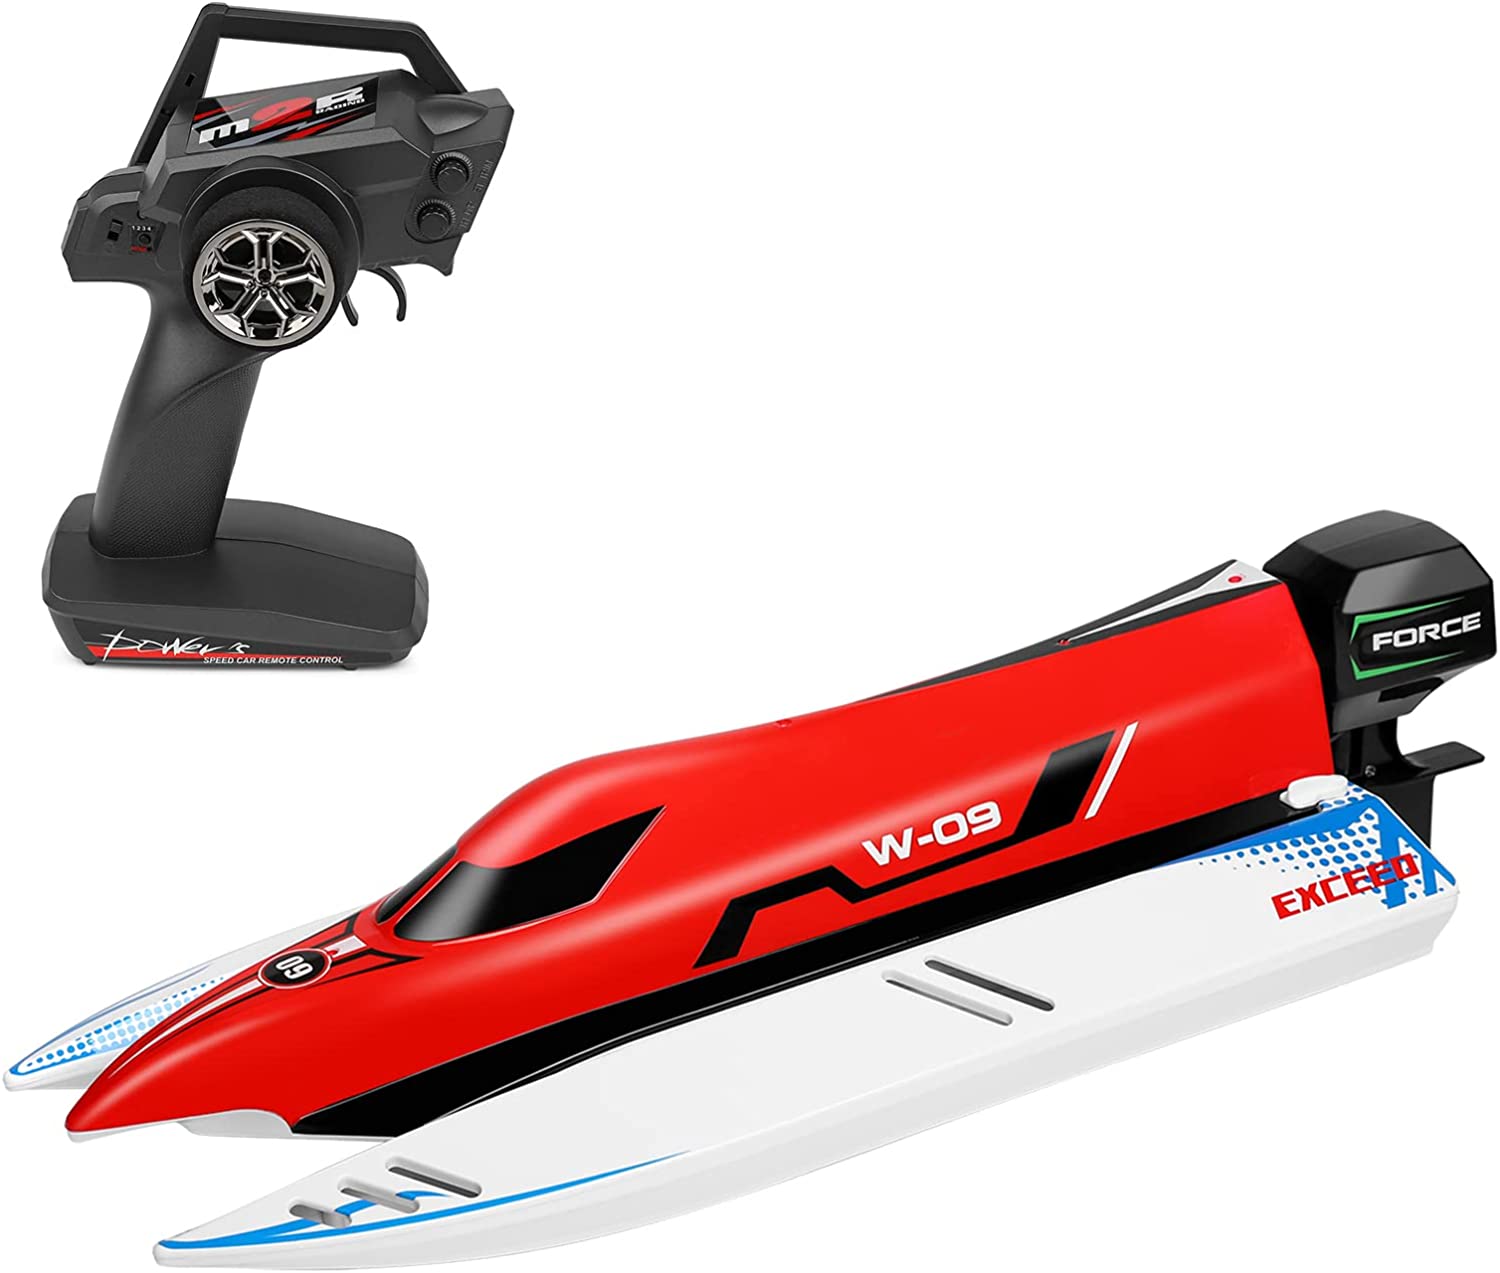 WLtoys WL915-A Brushless RC Boat, 2.4GHz Remote Control Boat, 45KM/H High Speed RC Racing Boat ( rights itself if flipped )